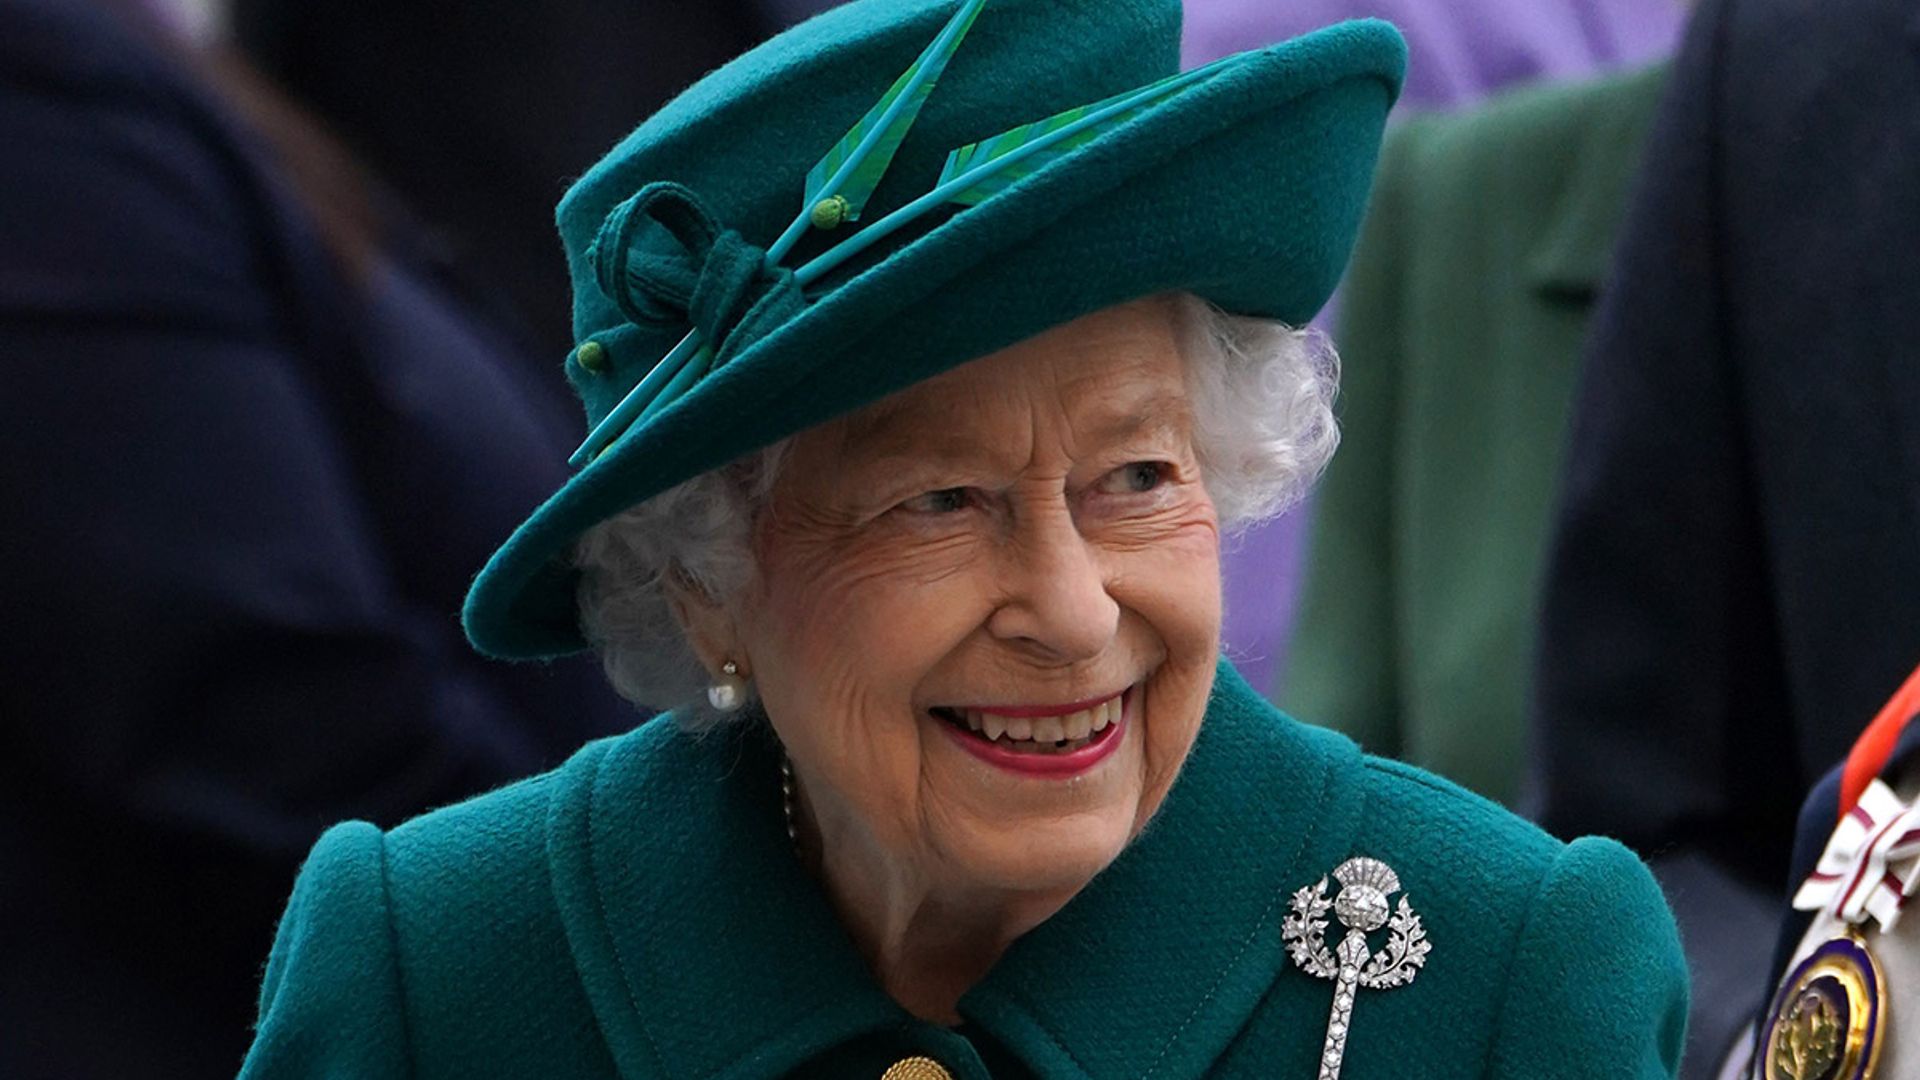 The Queen to hire extra help at royal residence – and it's a top-secret job